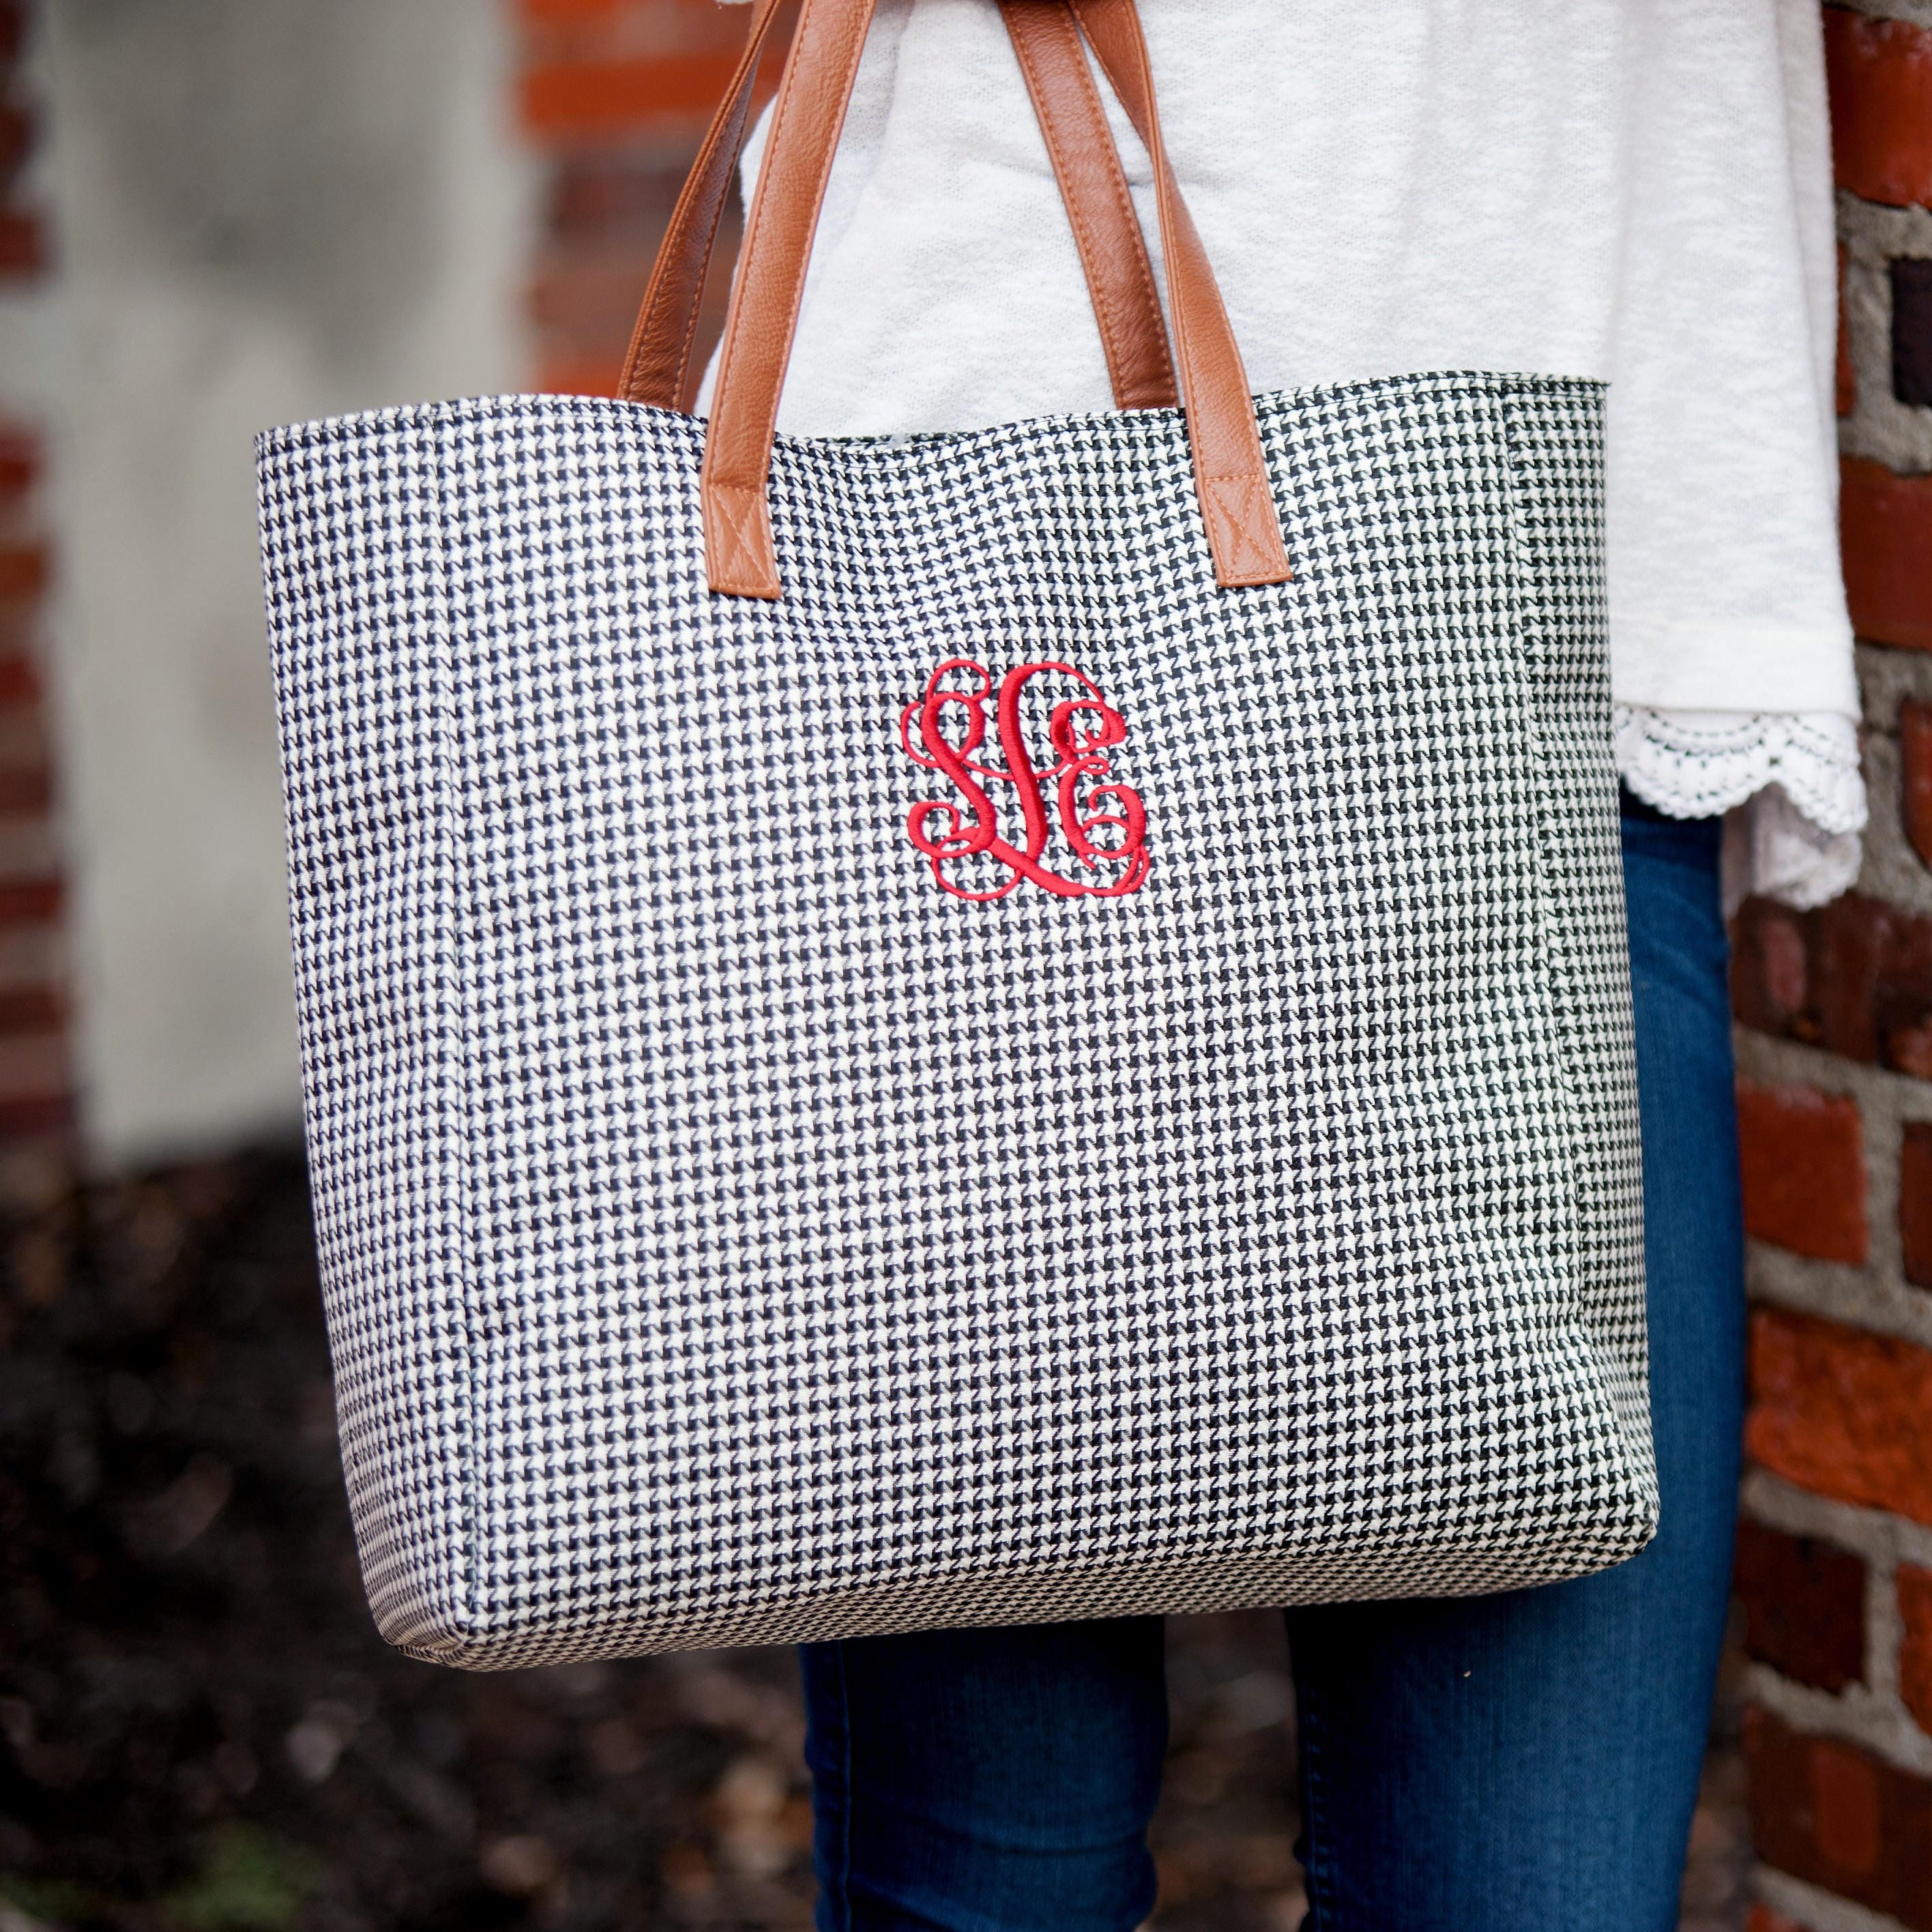 Monogram Tote Bag Personalized Tote Bag Monogrammed Gifts | Etsy